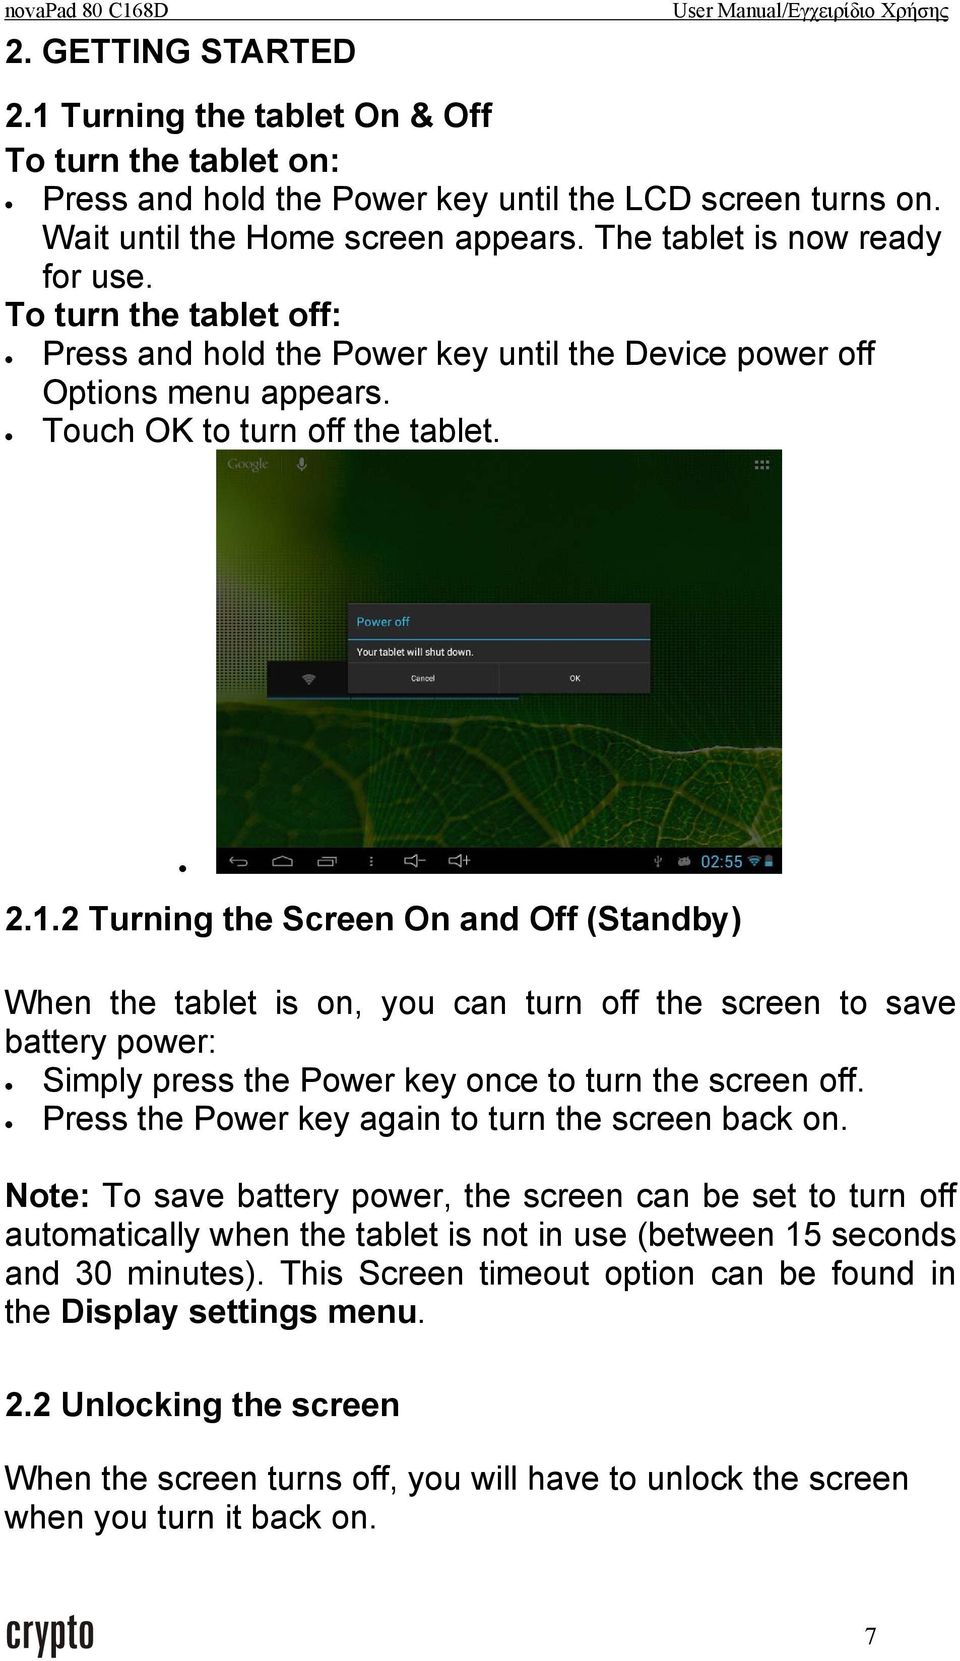 2 Turning the Screen On and Off (Standby) When the tablet is on, you can turn off the screen to save battery power: Simply press the Power key once to turn the screen off.